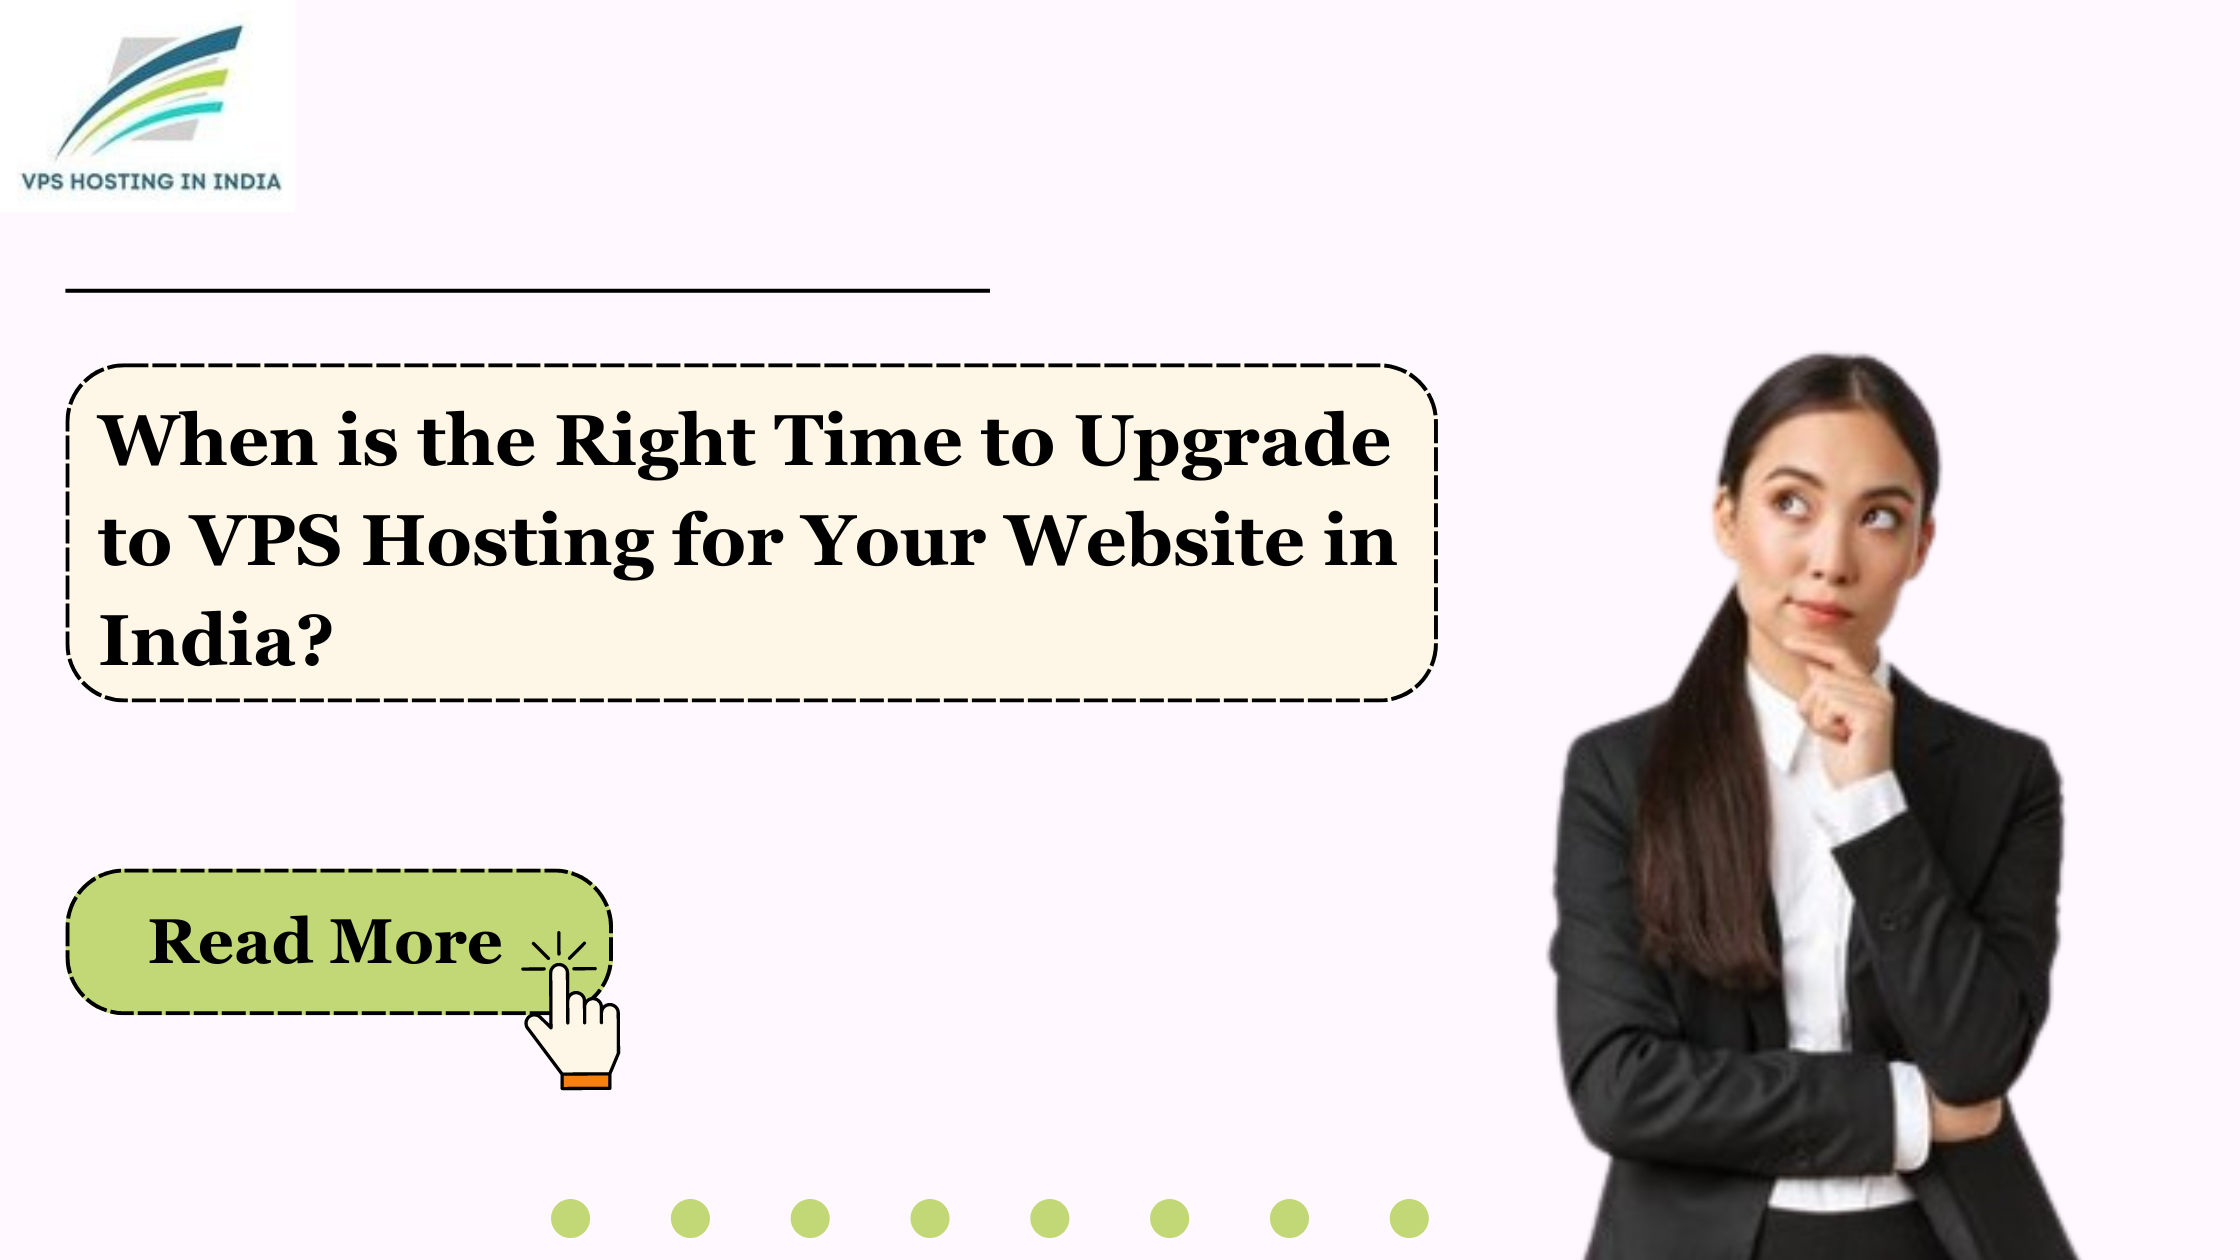 When is the Right Time to Upgrade to VPS Hosting for Your Website in India